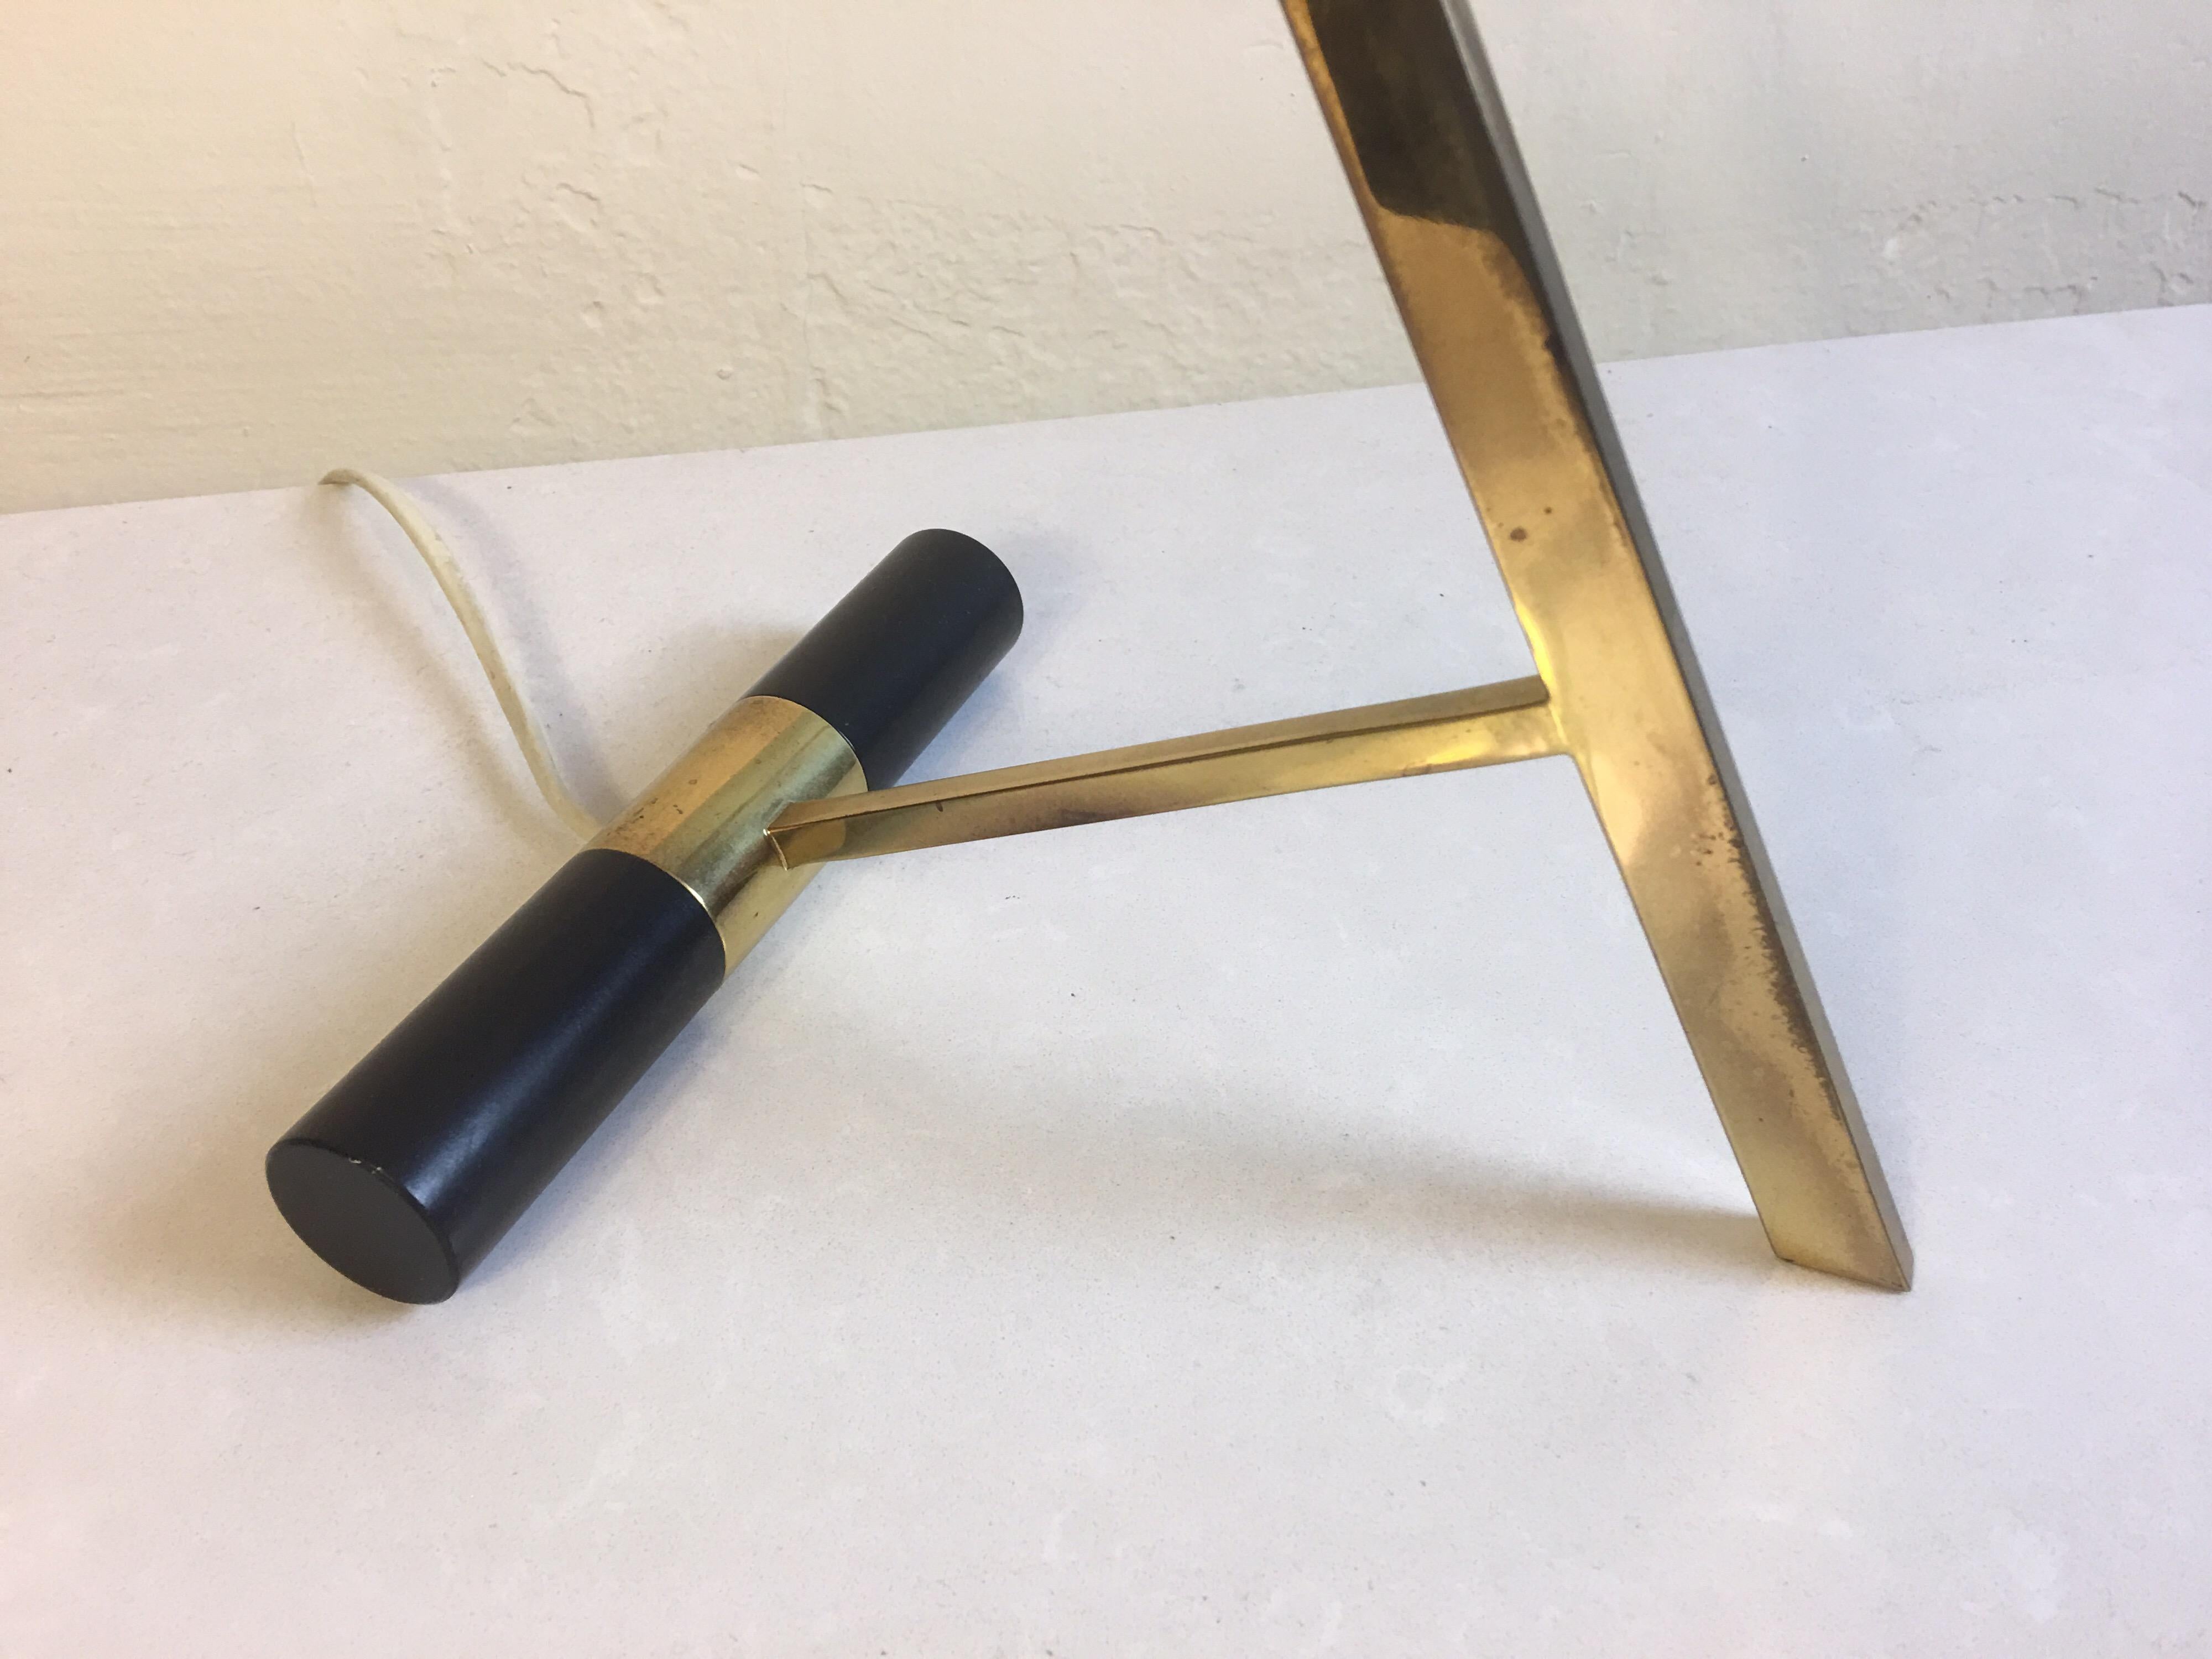 Z-shaped desk or table lamp designed by Louis Kalff for Philips Lighting of the Netherlands. Makers mark pictured. Very clean example of this lamp. Nice in line period switch and wiring. Brass is still bright and black shade very clean.